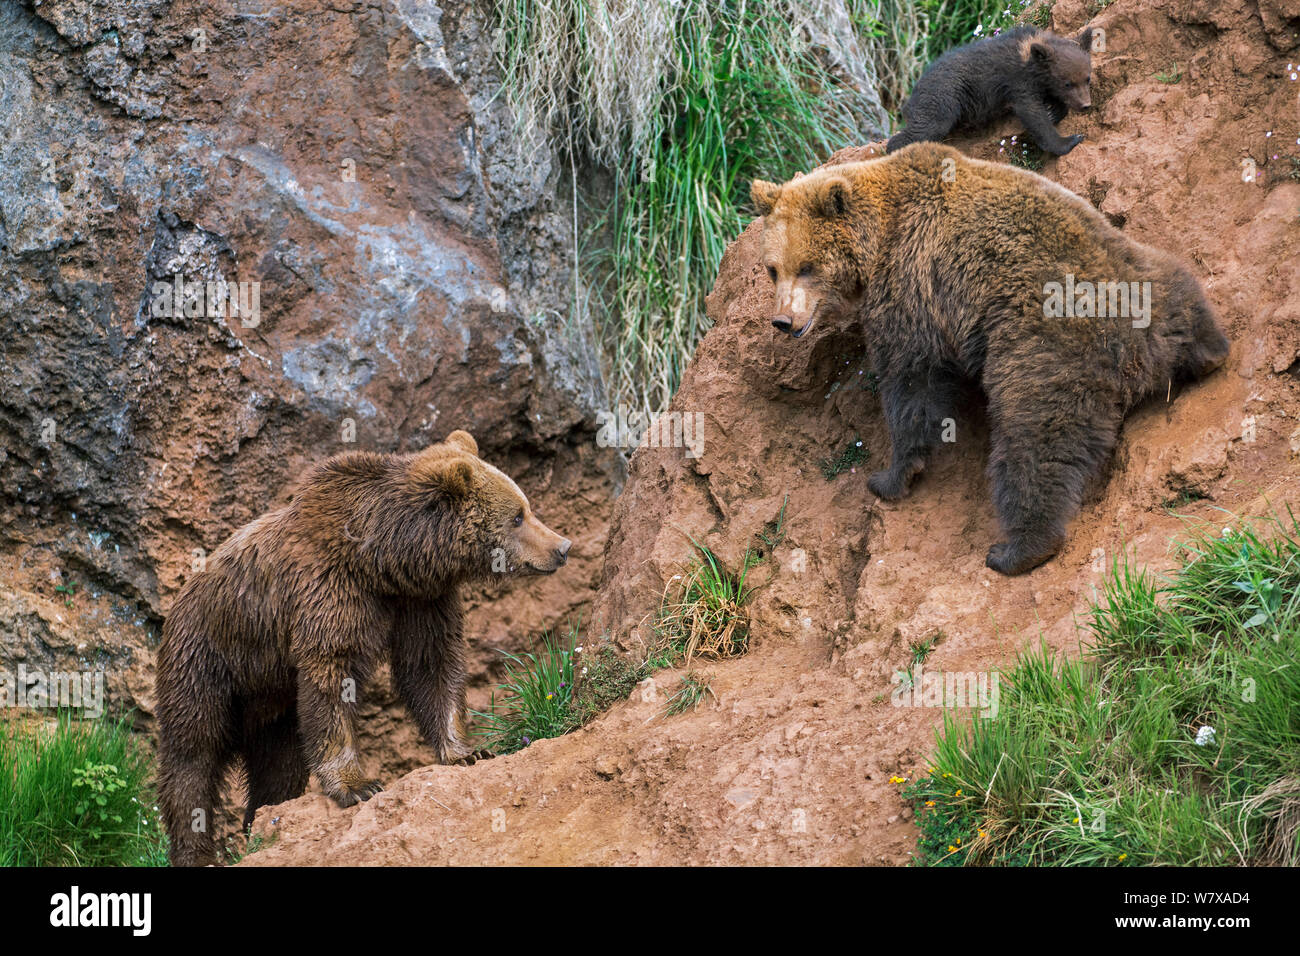 Eurasian brown bear (Ursus arctos arctos) female defending cub from another bear, Cabarceno Park, Cantabria, Spain, May. Captive, occurs in Northern Europe and Russia. Stock Photo